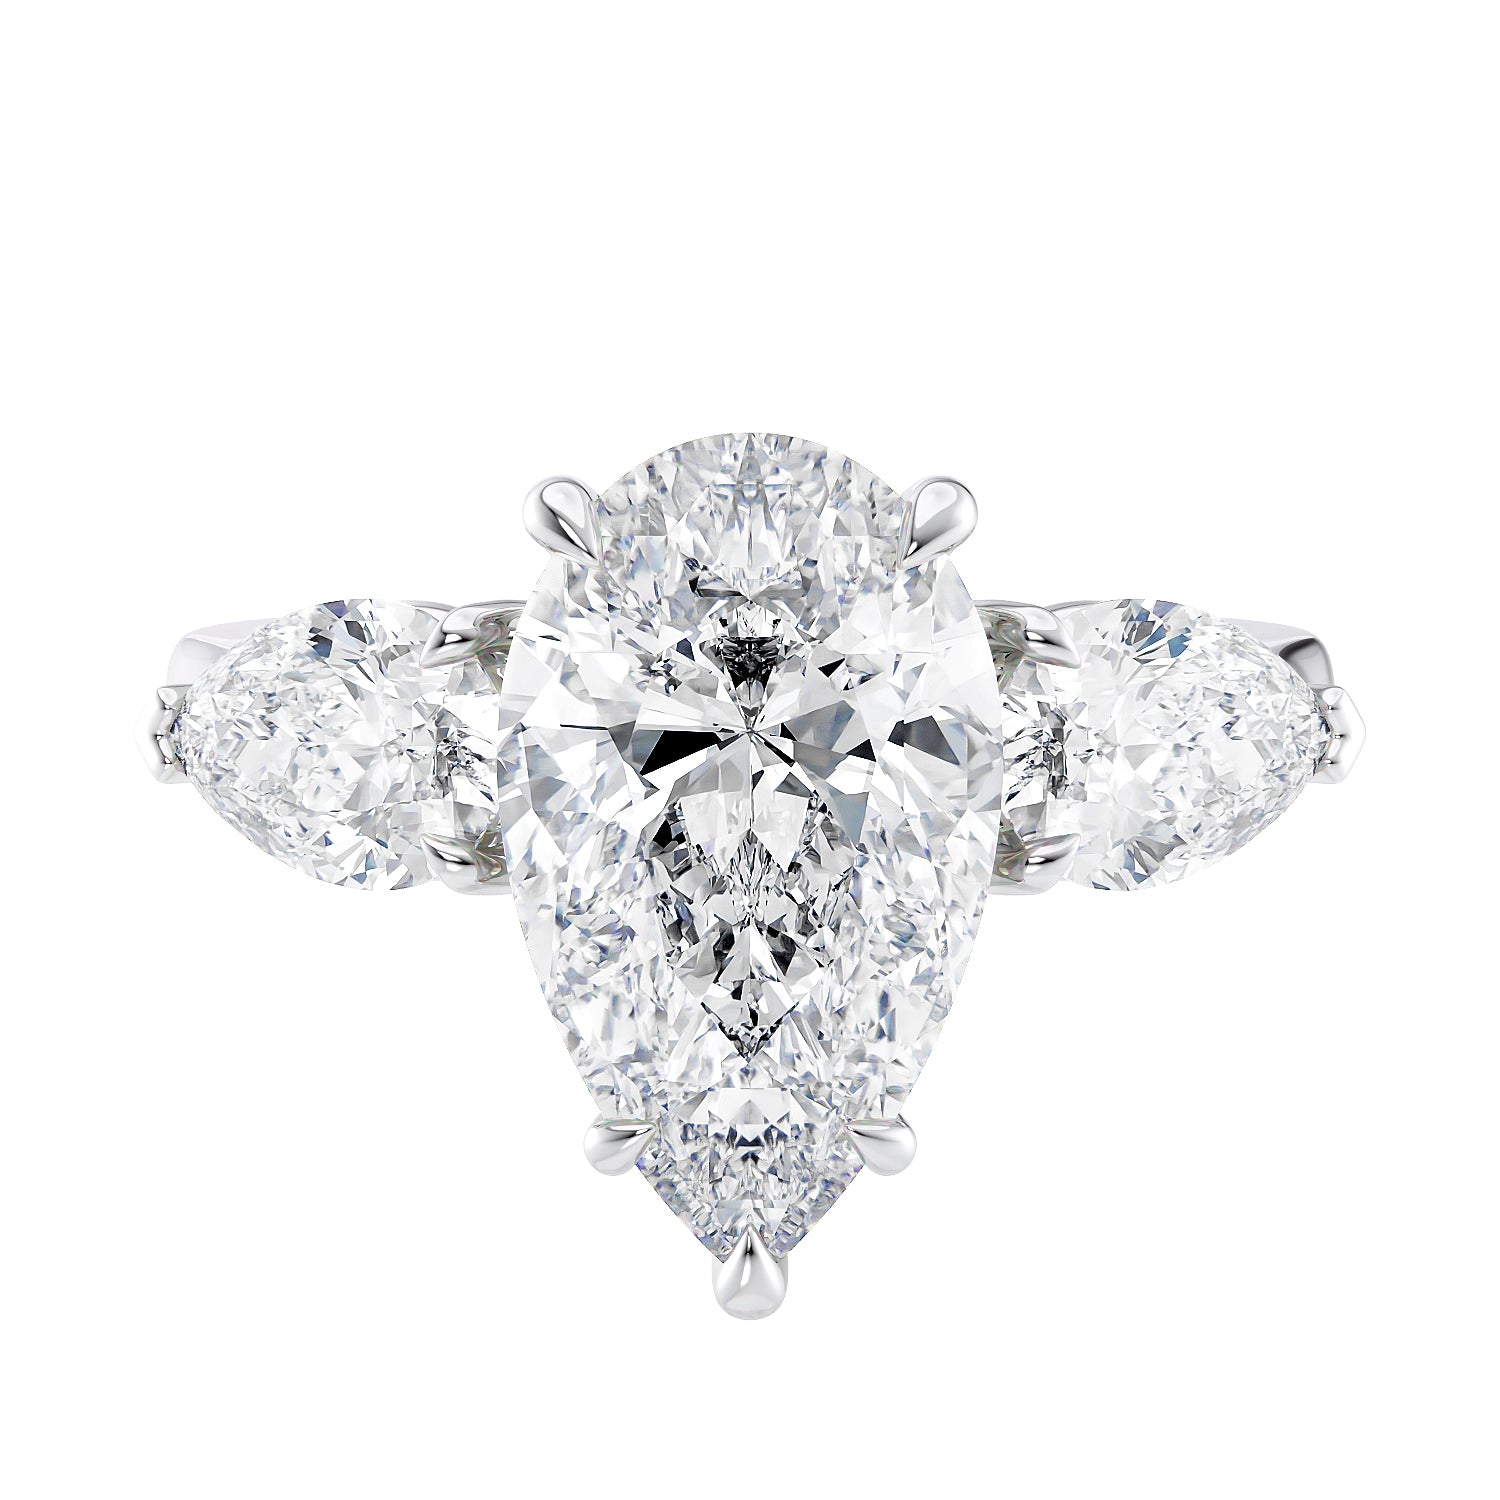 3 stone pear cut lab diamond centre with pear cut shoulders engagement ring 18 carat white gold front view.